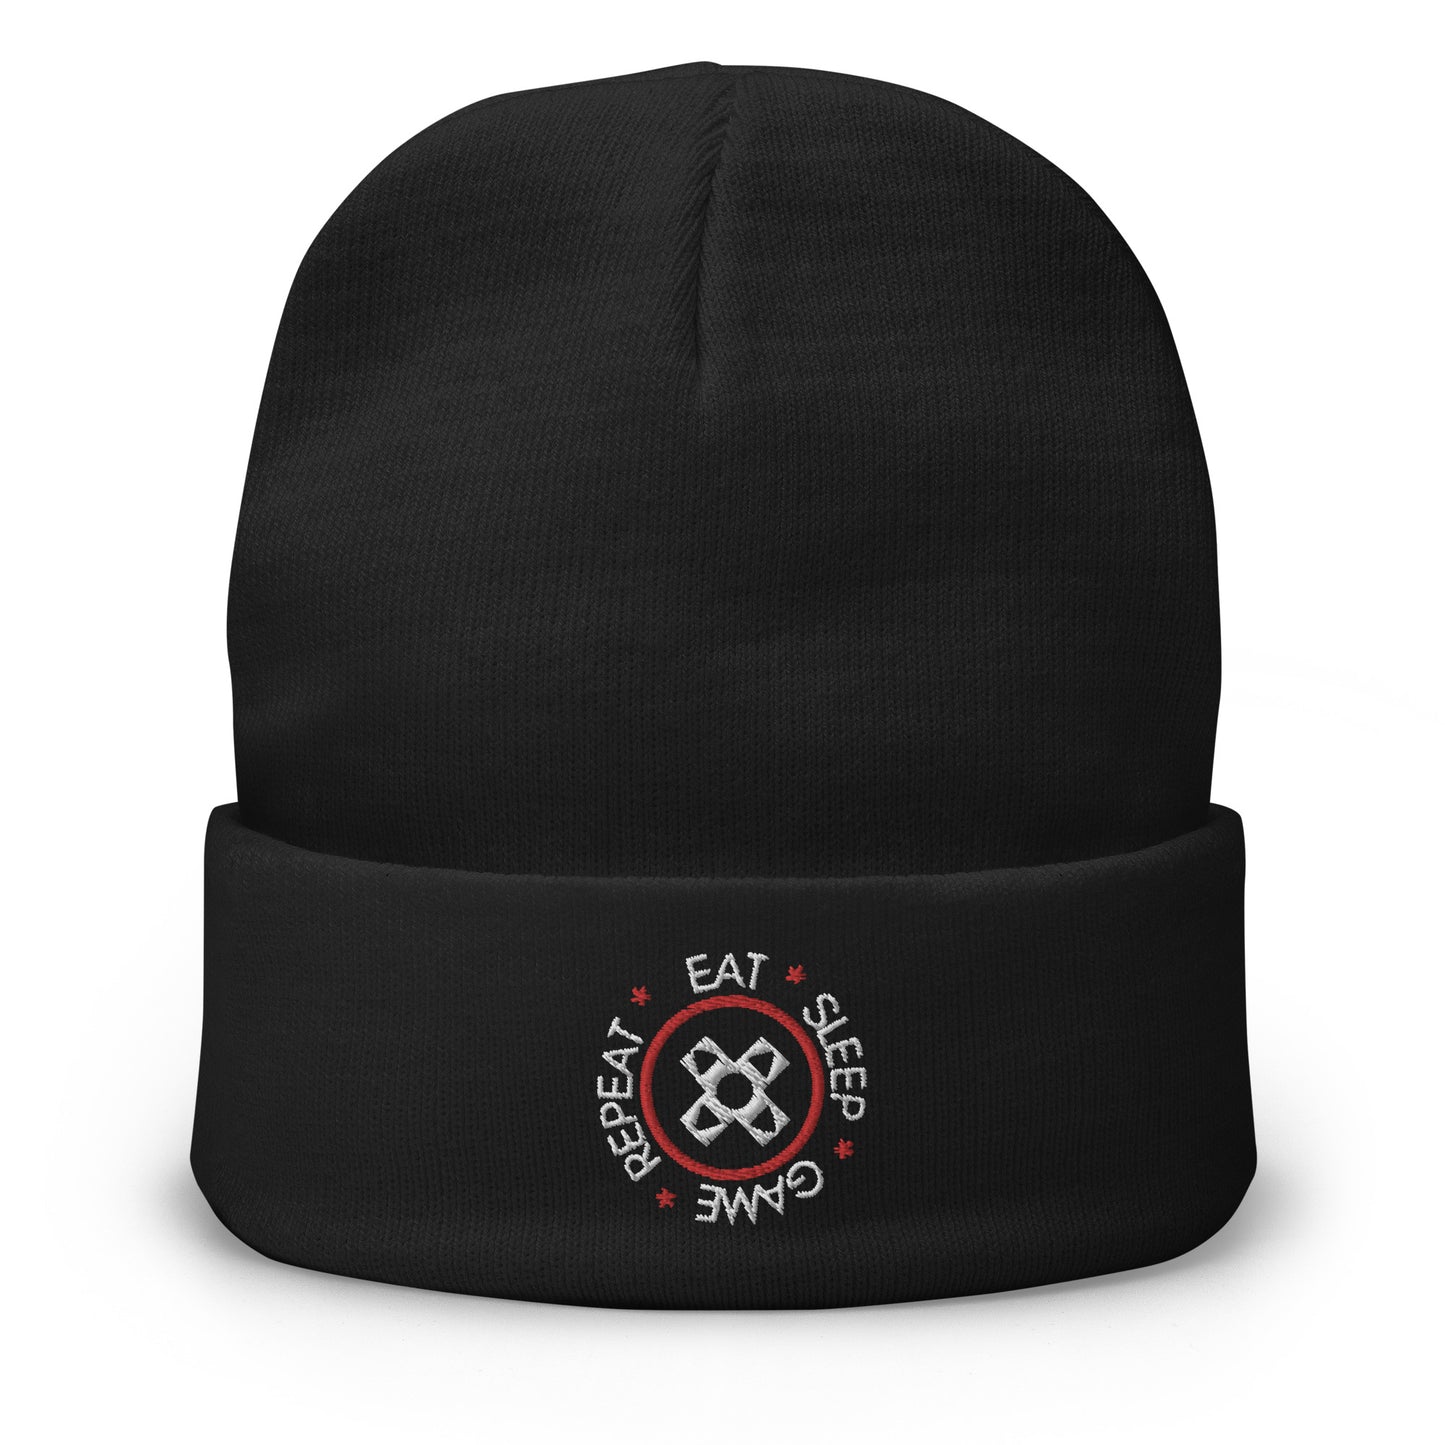 Eat Sleep Game Repeat Embroidered Beanie